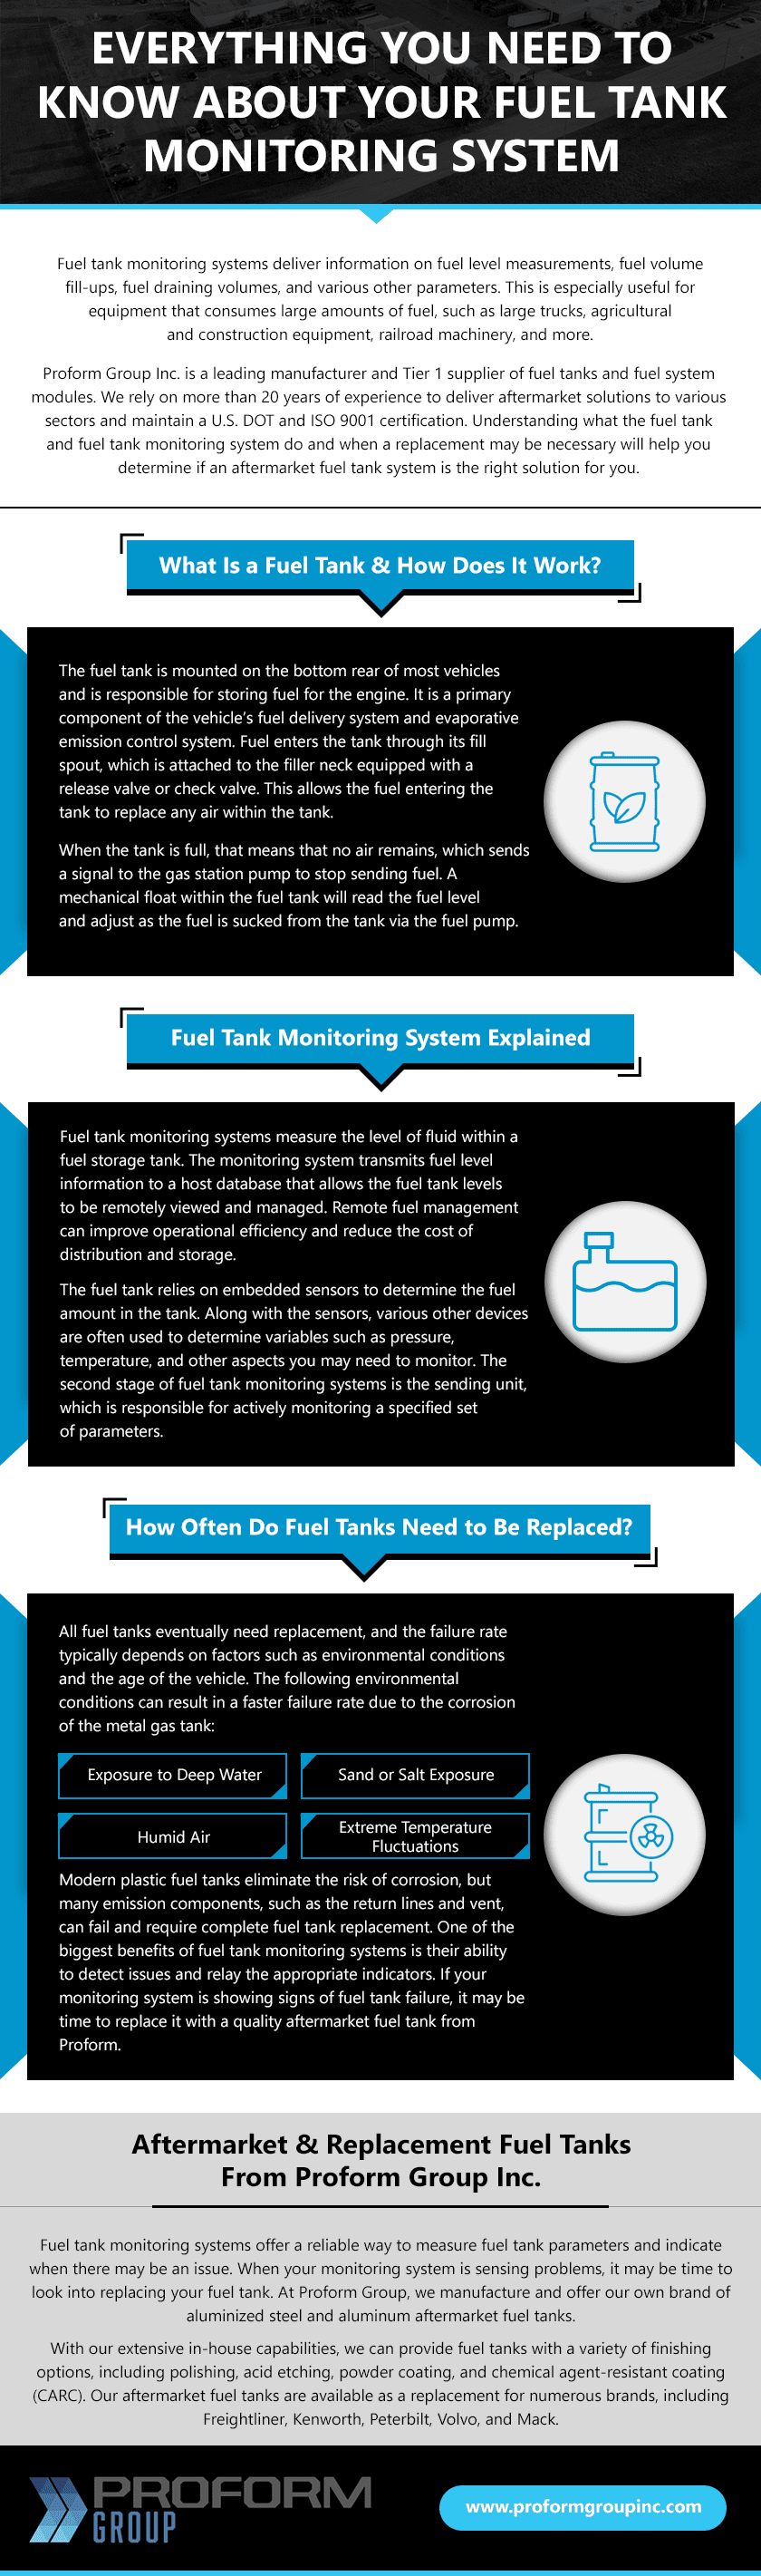 Everything You Need To Know About Your Fuel Tank Monitoring System